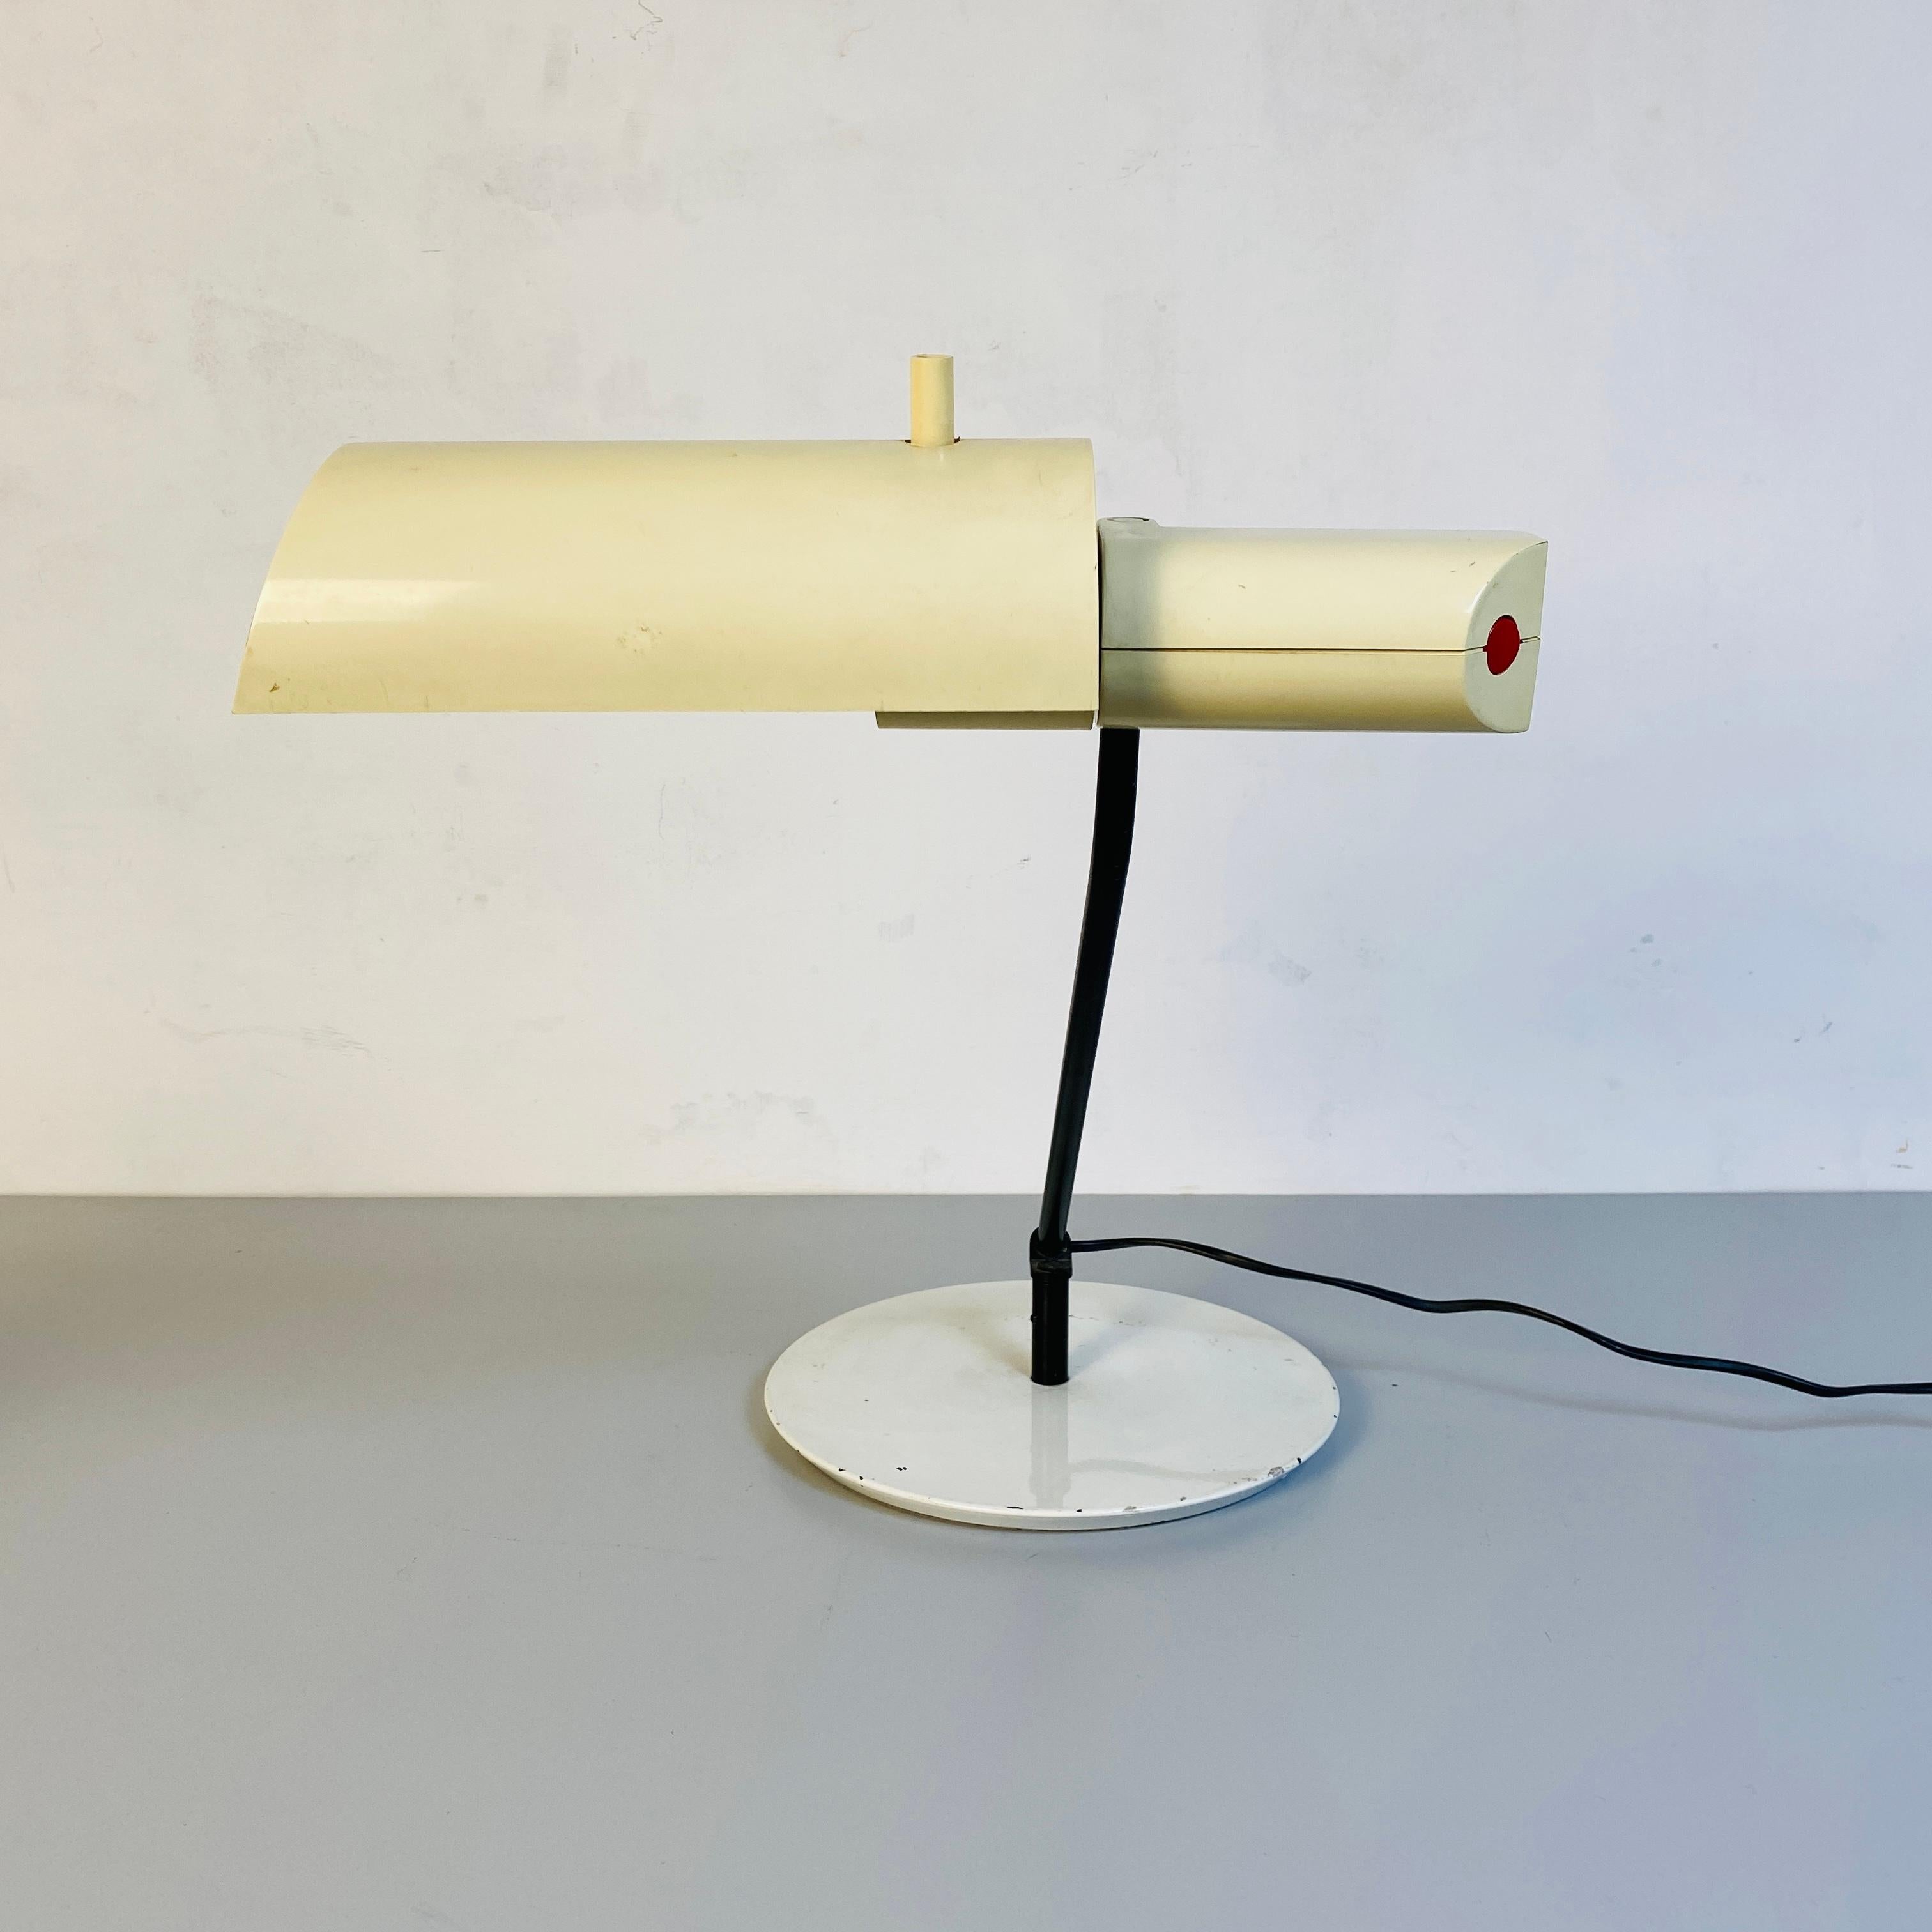 Late 20th Century Mid-Century Modern Metal and Plastic Table Lamp with Irregular Structure, 1980s For Sale